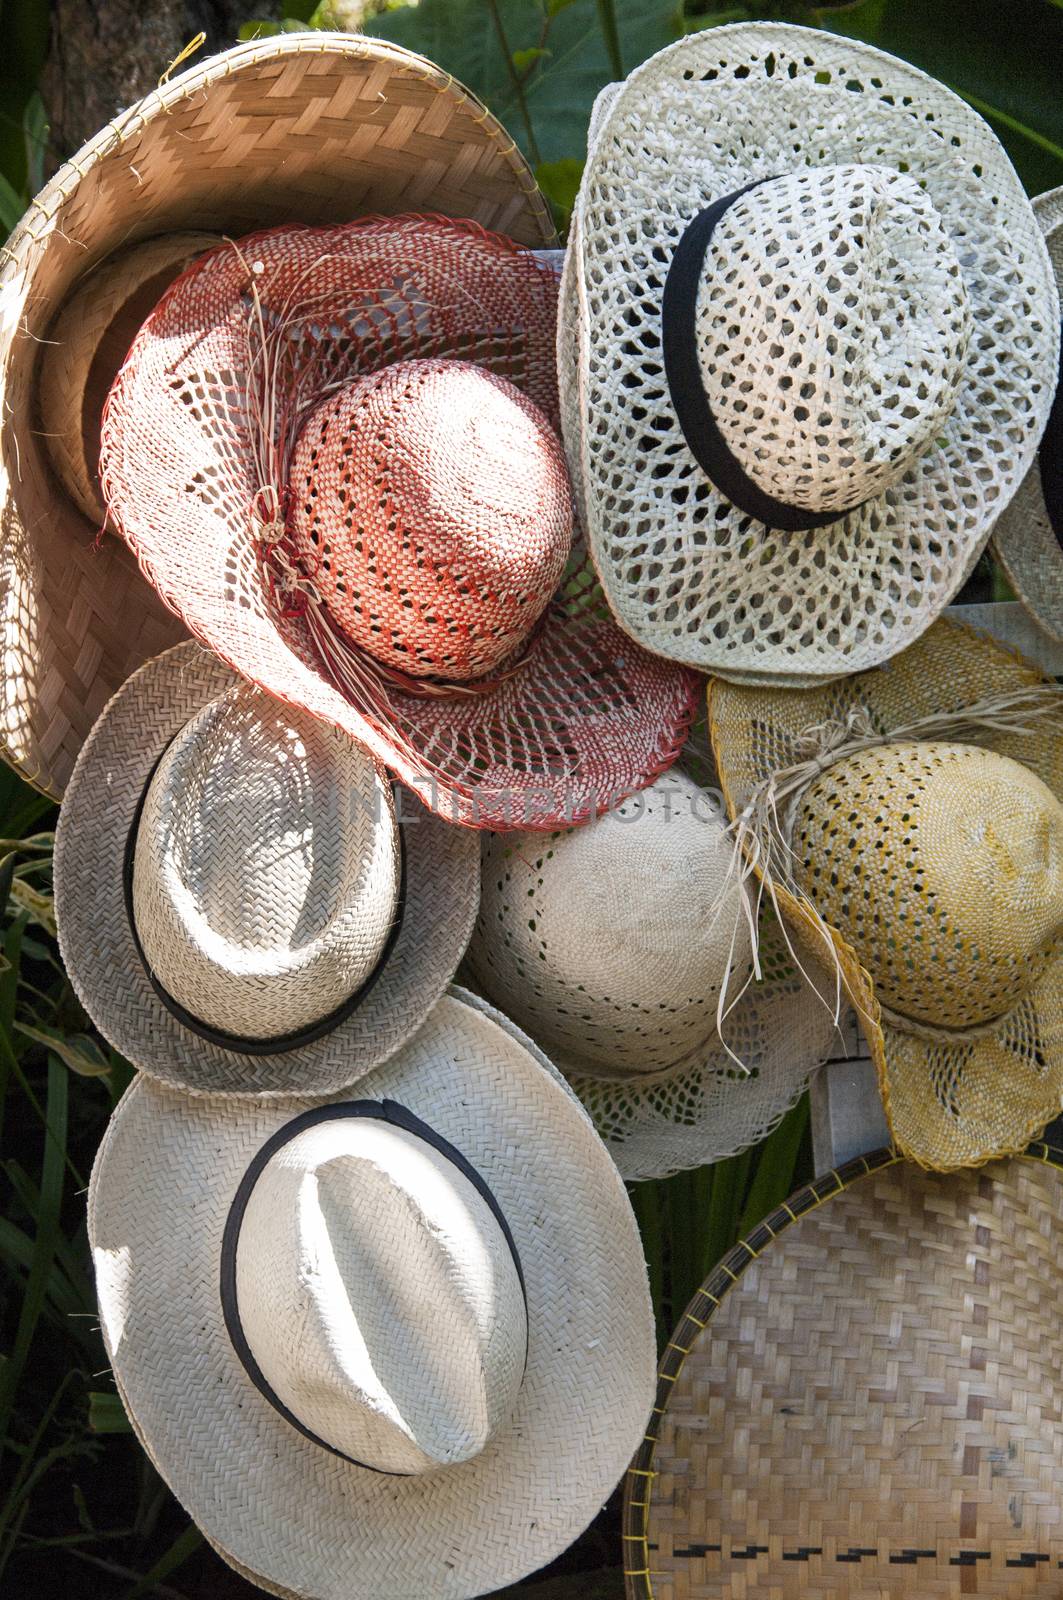 Sun hats, mix colors by CatherineL-Prod